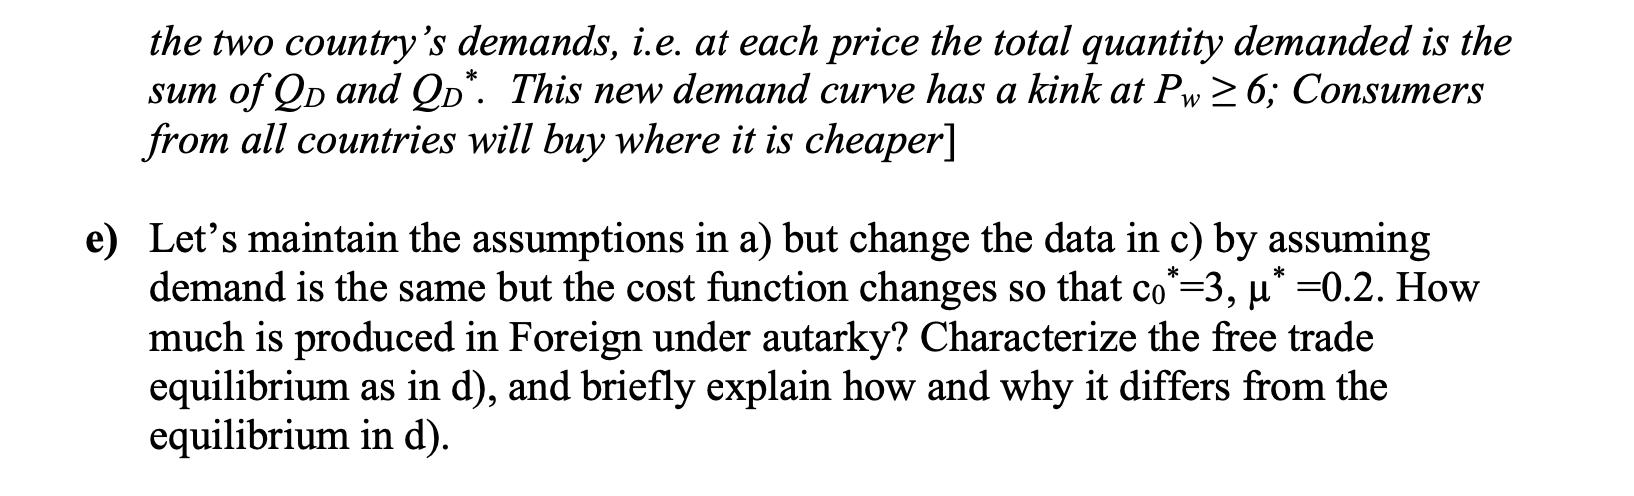 the two countrys demands, i.e. at each price the total quantity demanded is the sum of Qd and Qp*. This new demand curve has